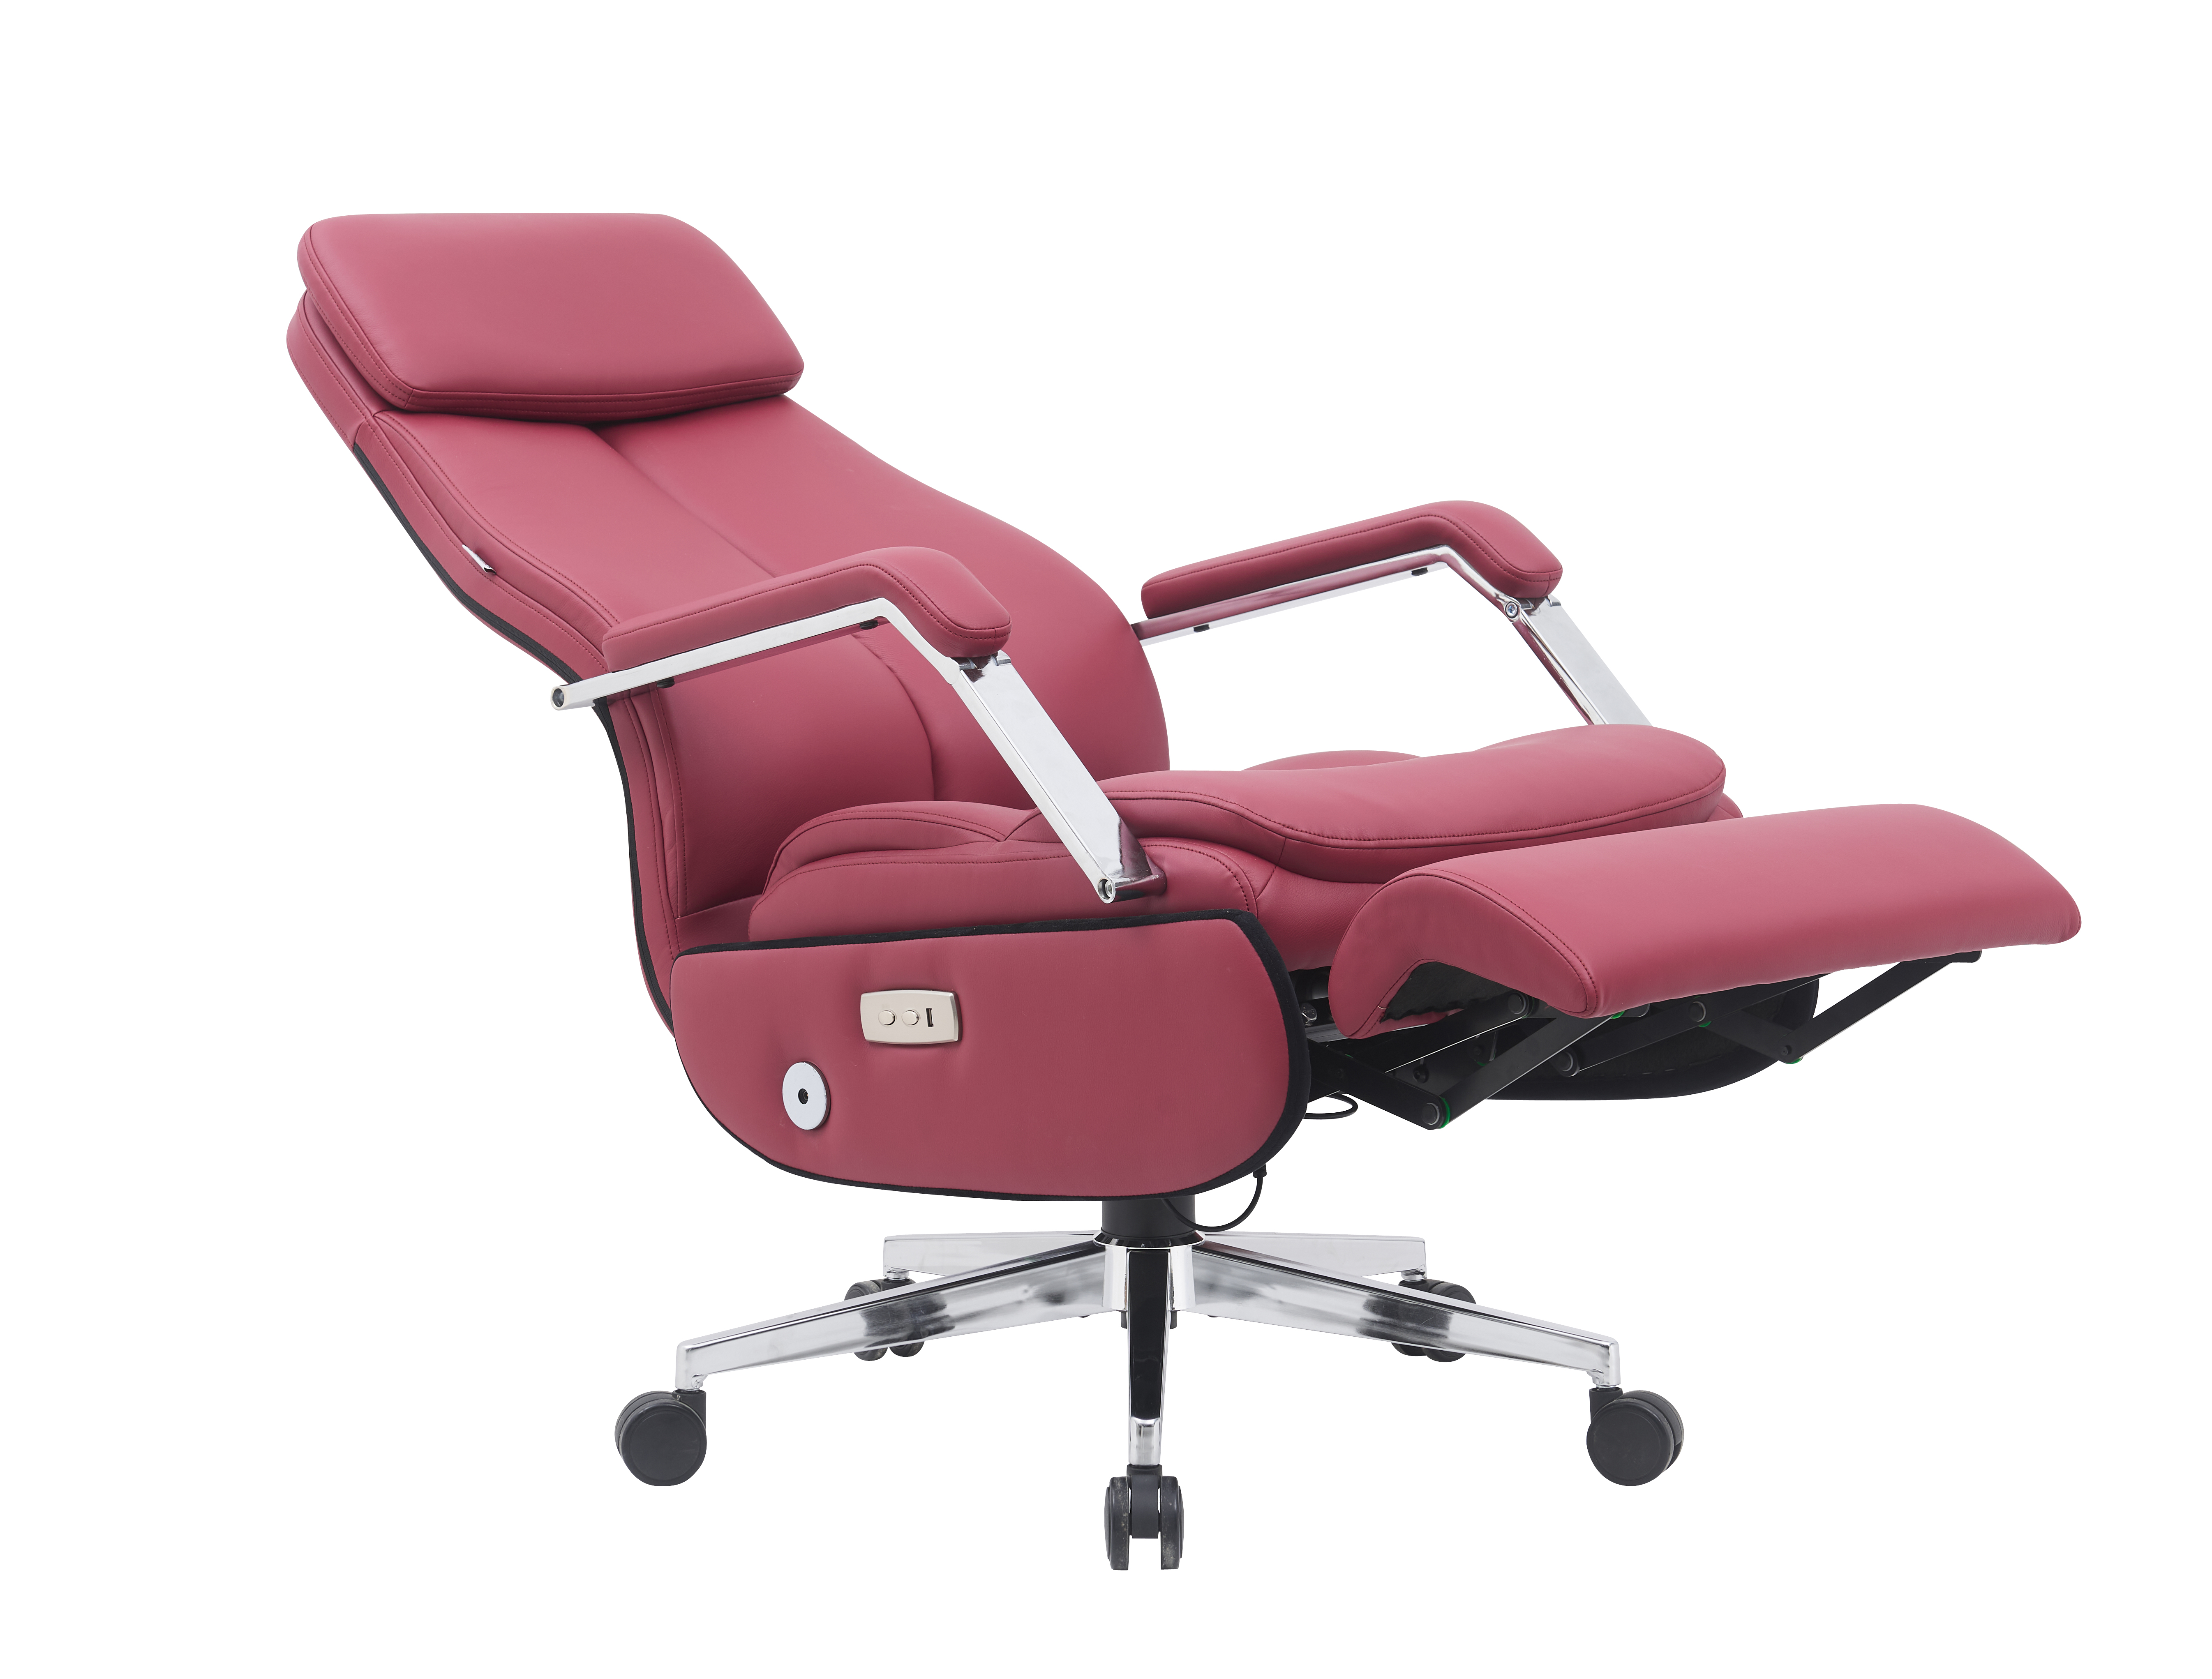 Wholesale Electric Adjustable Recliner Chair Office Chair with Footrest